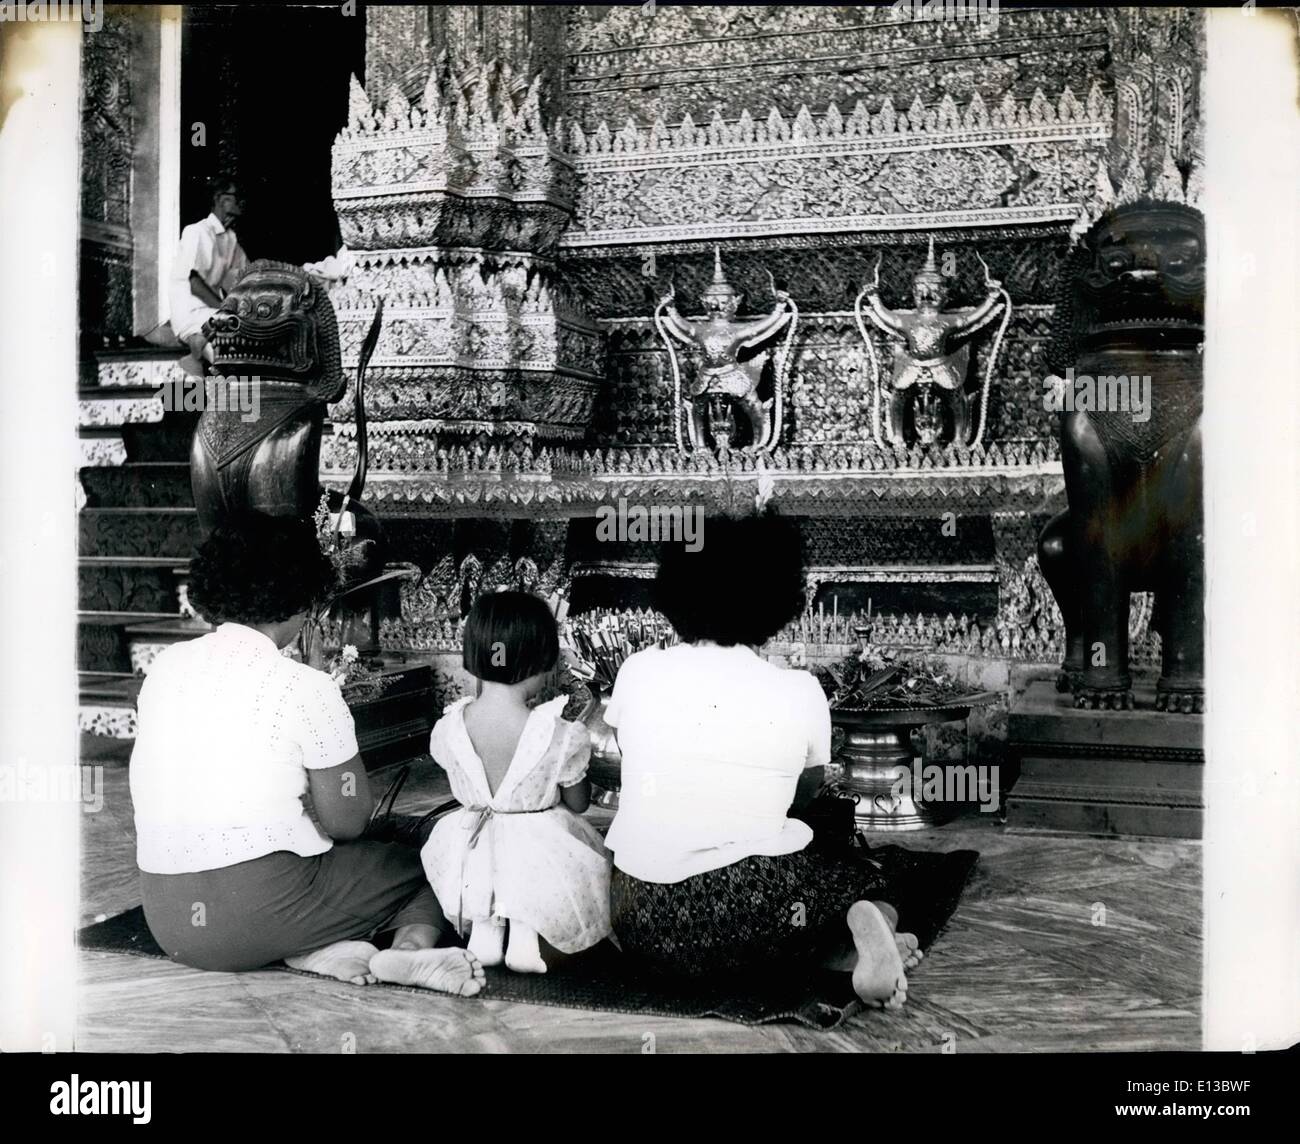 Feb. 29, 2012 - On the day on which the public visit the temple the various altars are seldom without worshippers many of them quite young... The Temple Of The Emerald Buddha: Siam's Private Royal Temple Photographed probably for the first time. Most beautiful and fabulous of all the temples in Asia, the Temple of the Emerald Buddha, shrine of the kings of Siam, has seldom if ever before been open for photography. These pictures, just received from our staff correspondent, were taken by special prmission and show something of its majesty and mystery Stock Photo